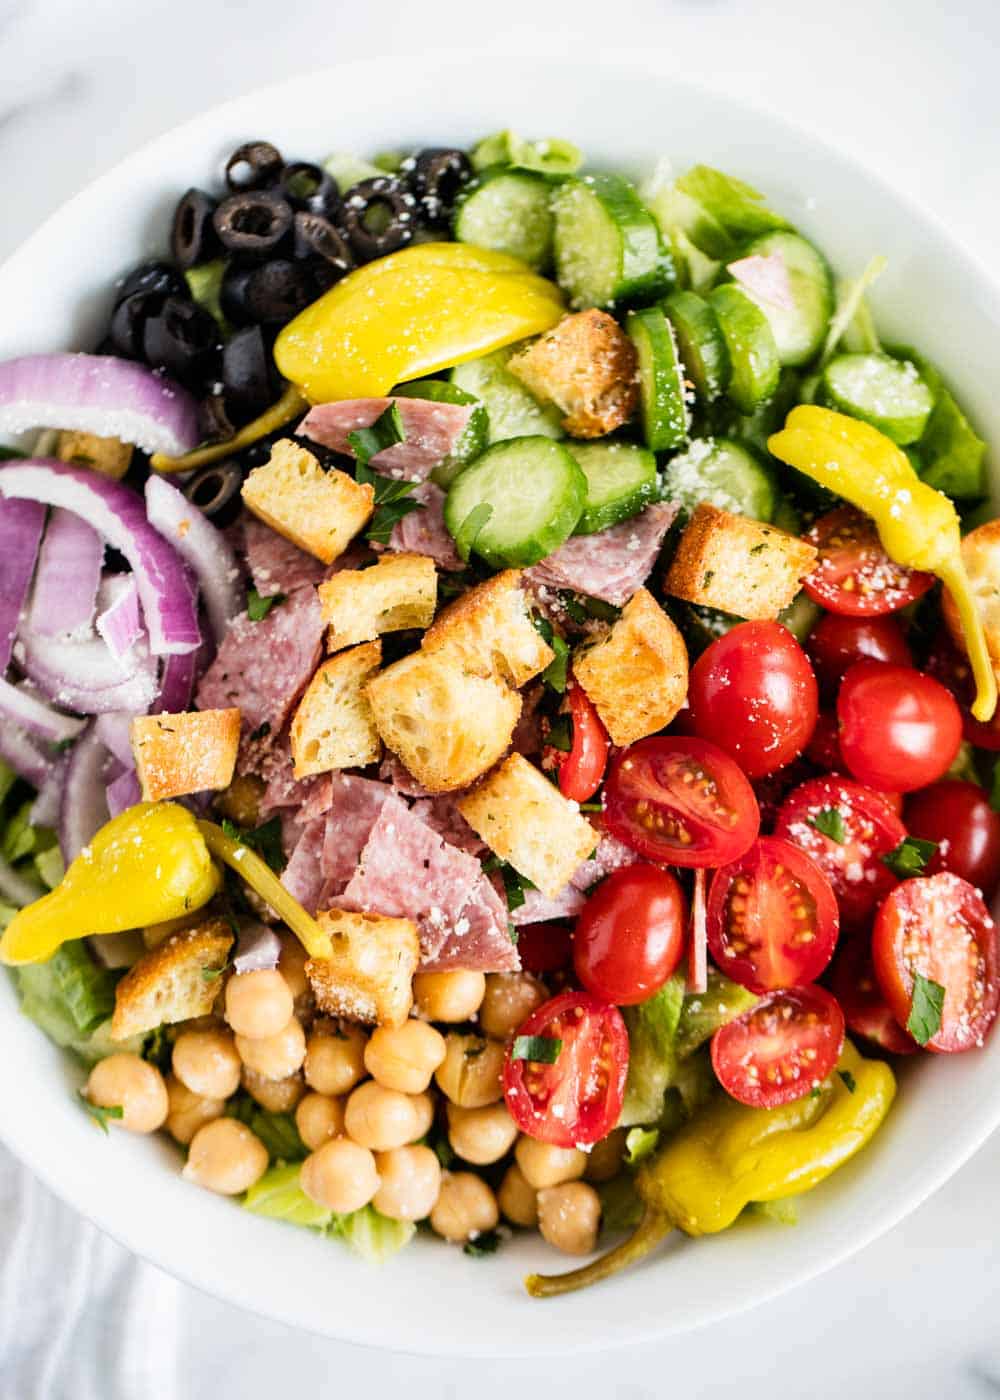 Quick and easy Italian chopped salad loaded with tons of fresh and flavorful ingredients. This big Italian salad makes the perfect lunch, dinner or side salad recipe.